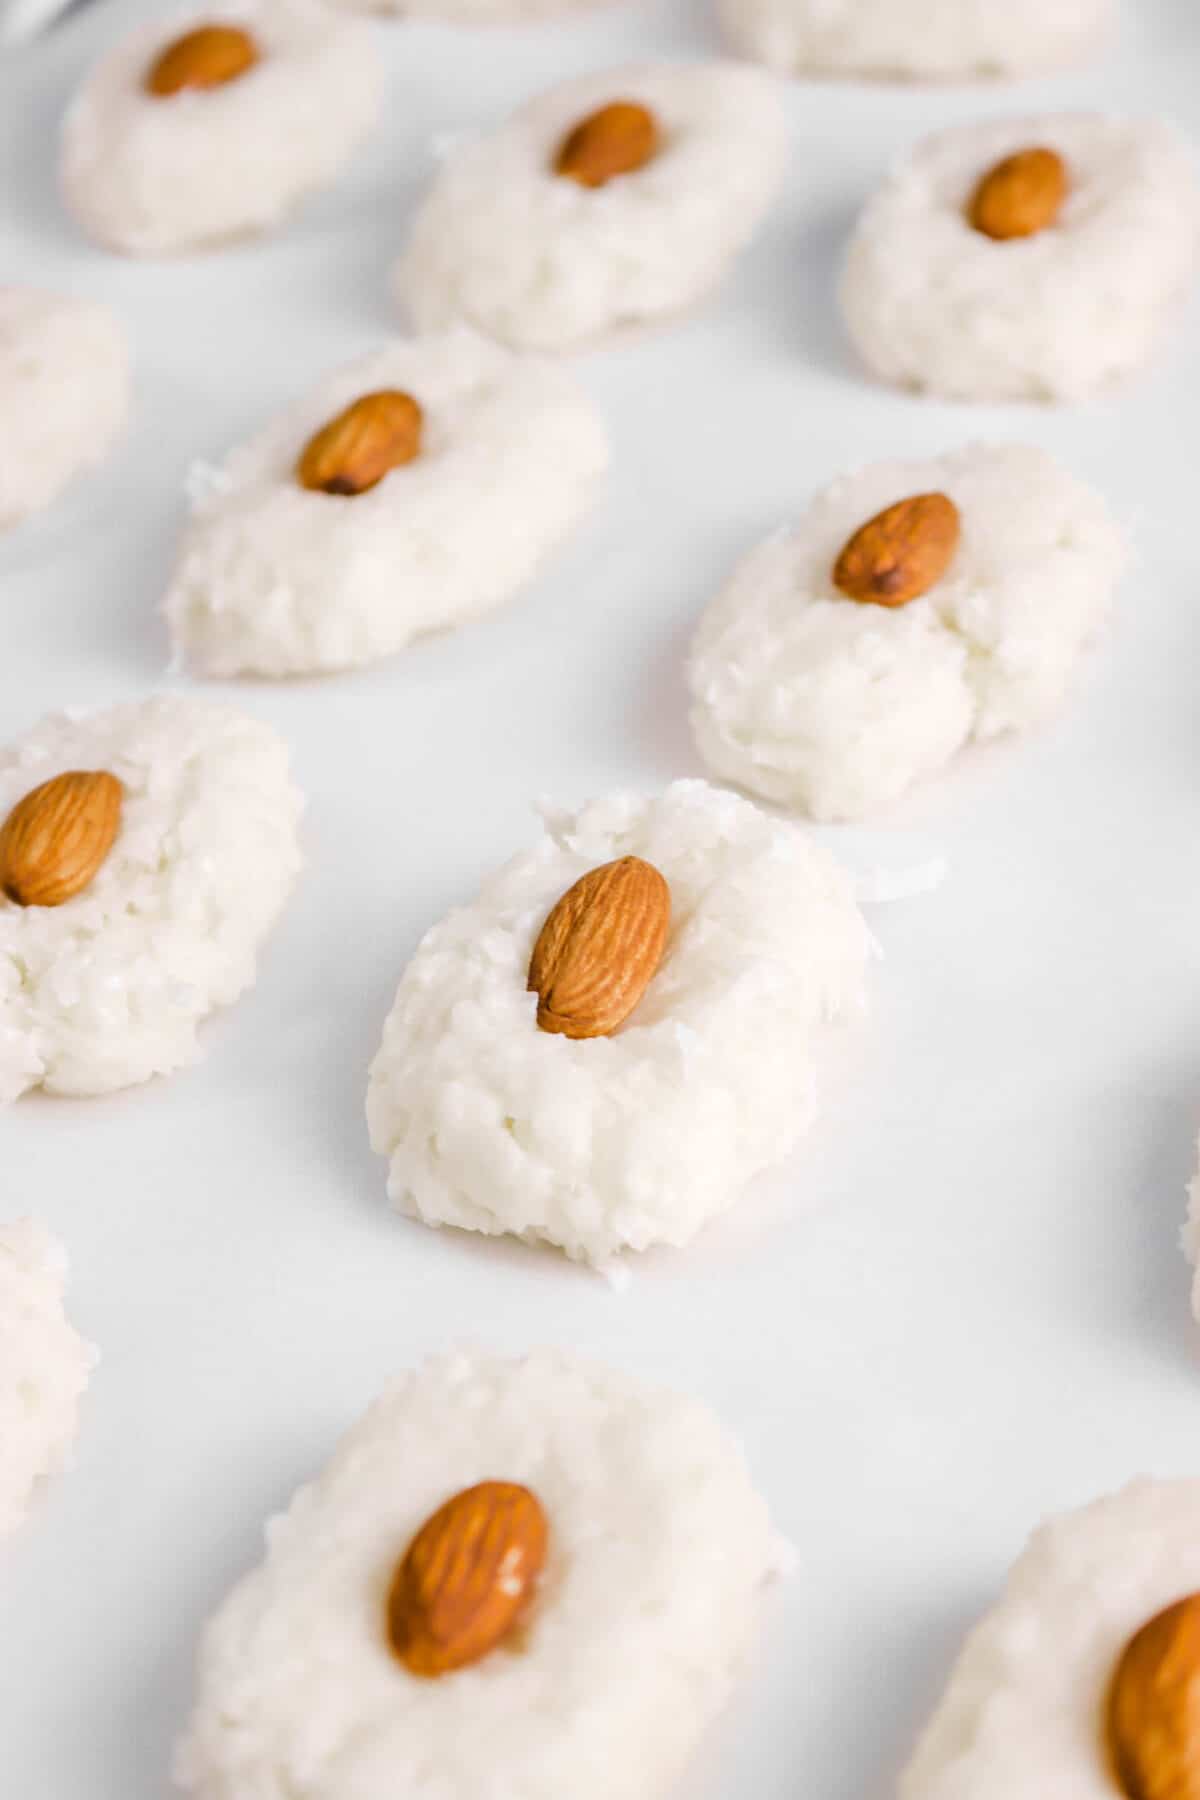 coconut filling formed into ovals with almond pressed on top